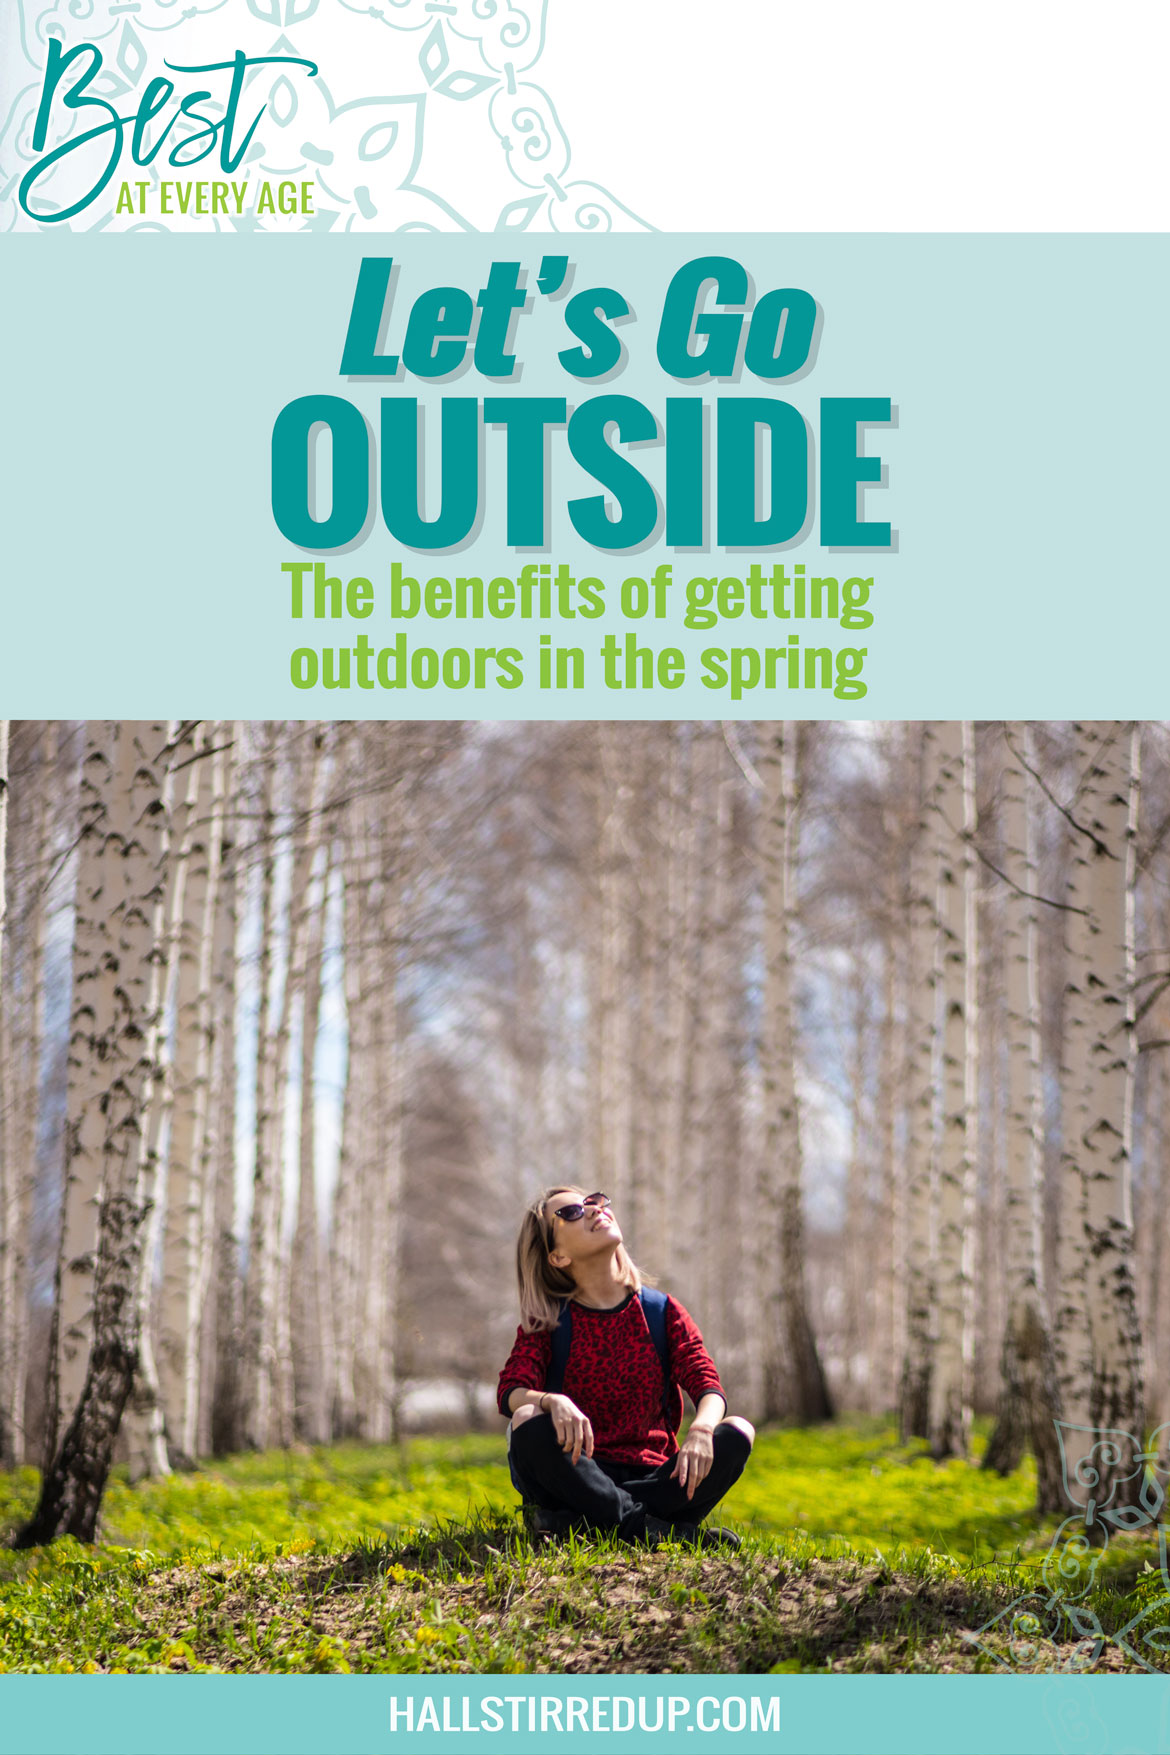 Let's go outside The benefits of being outdoors in the spring